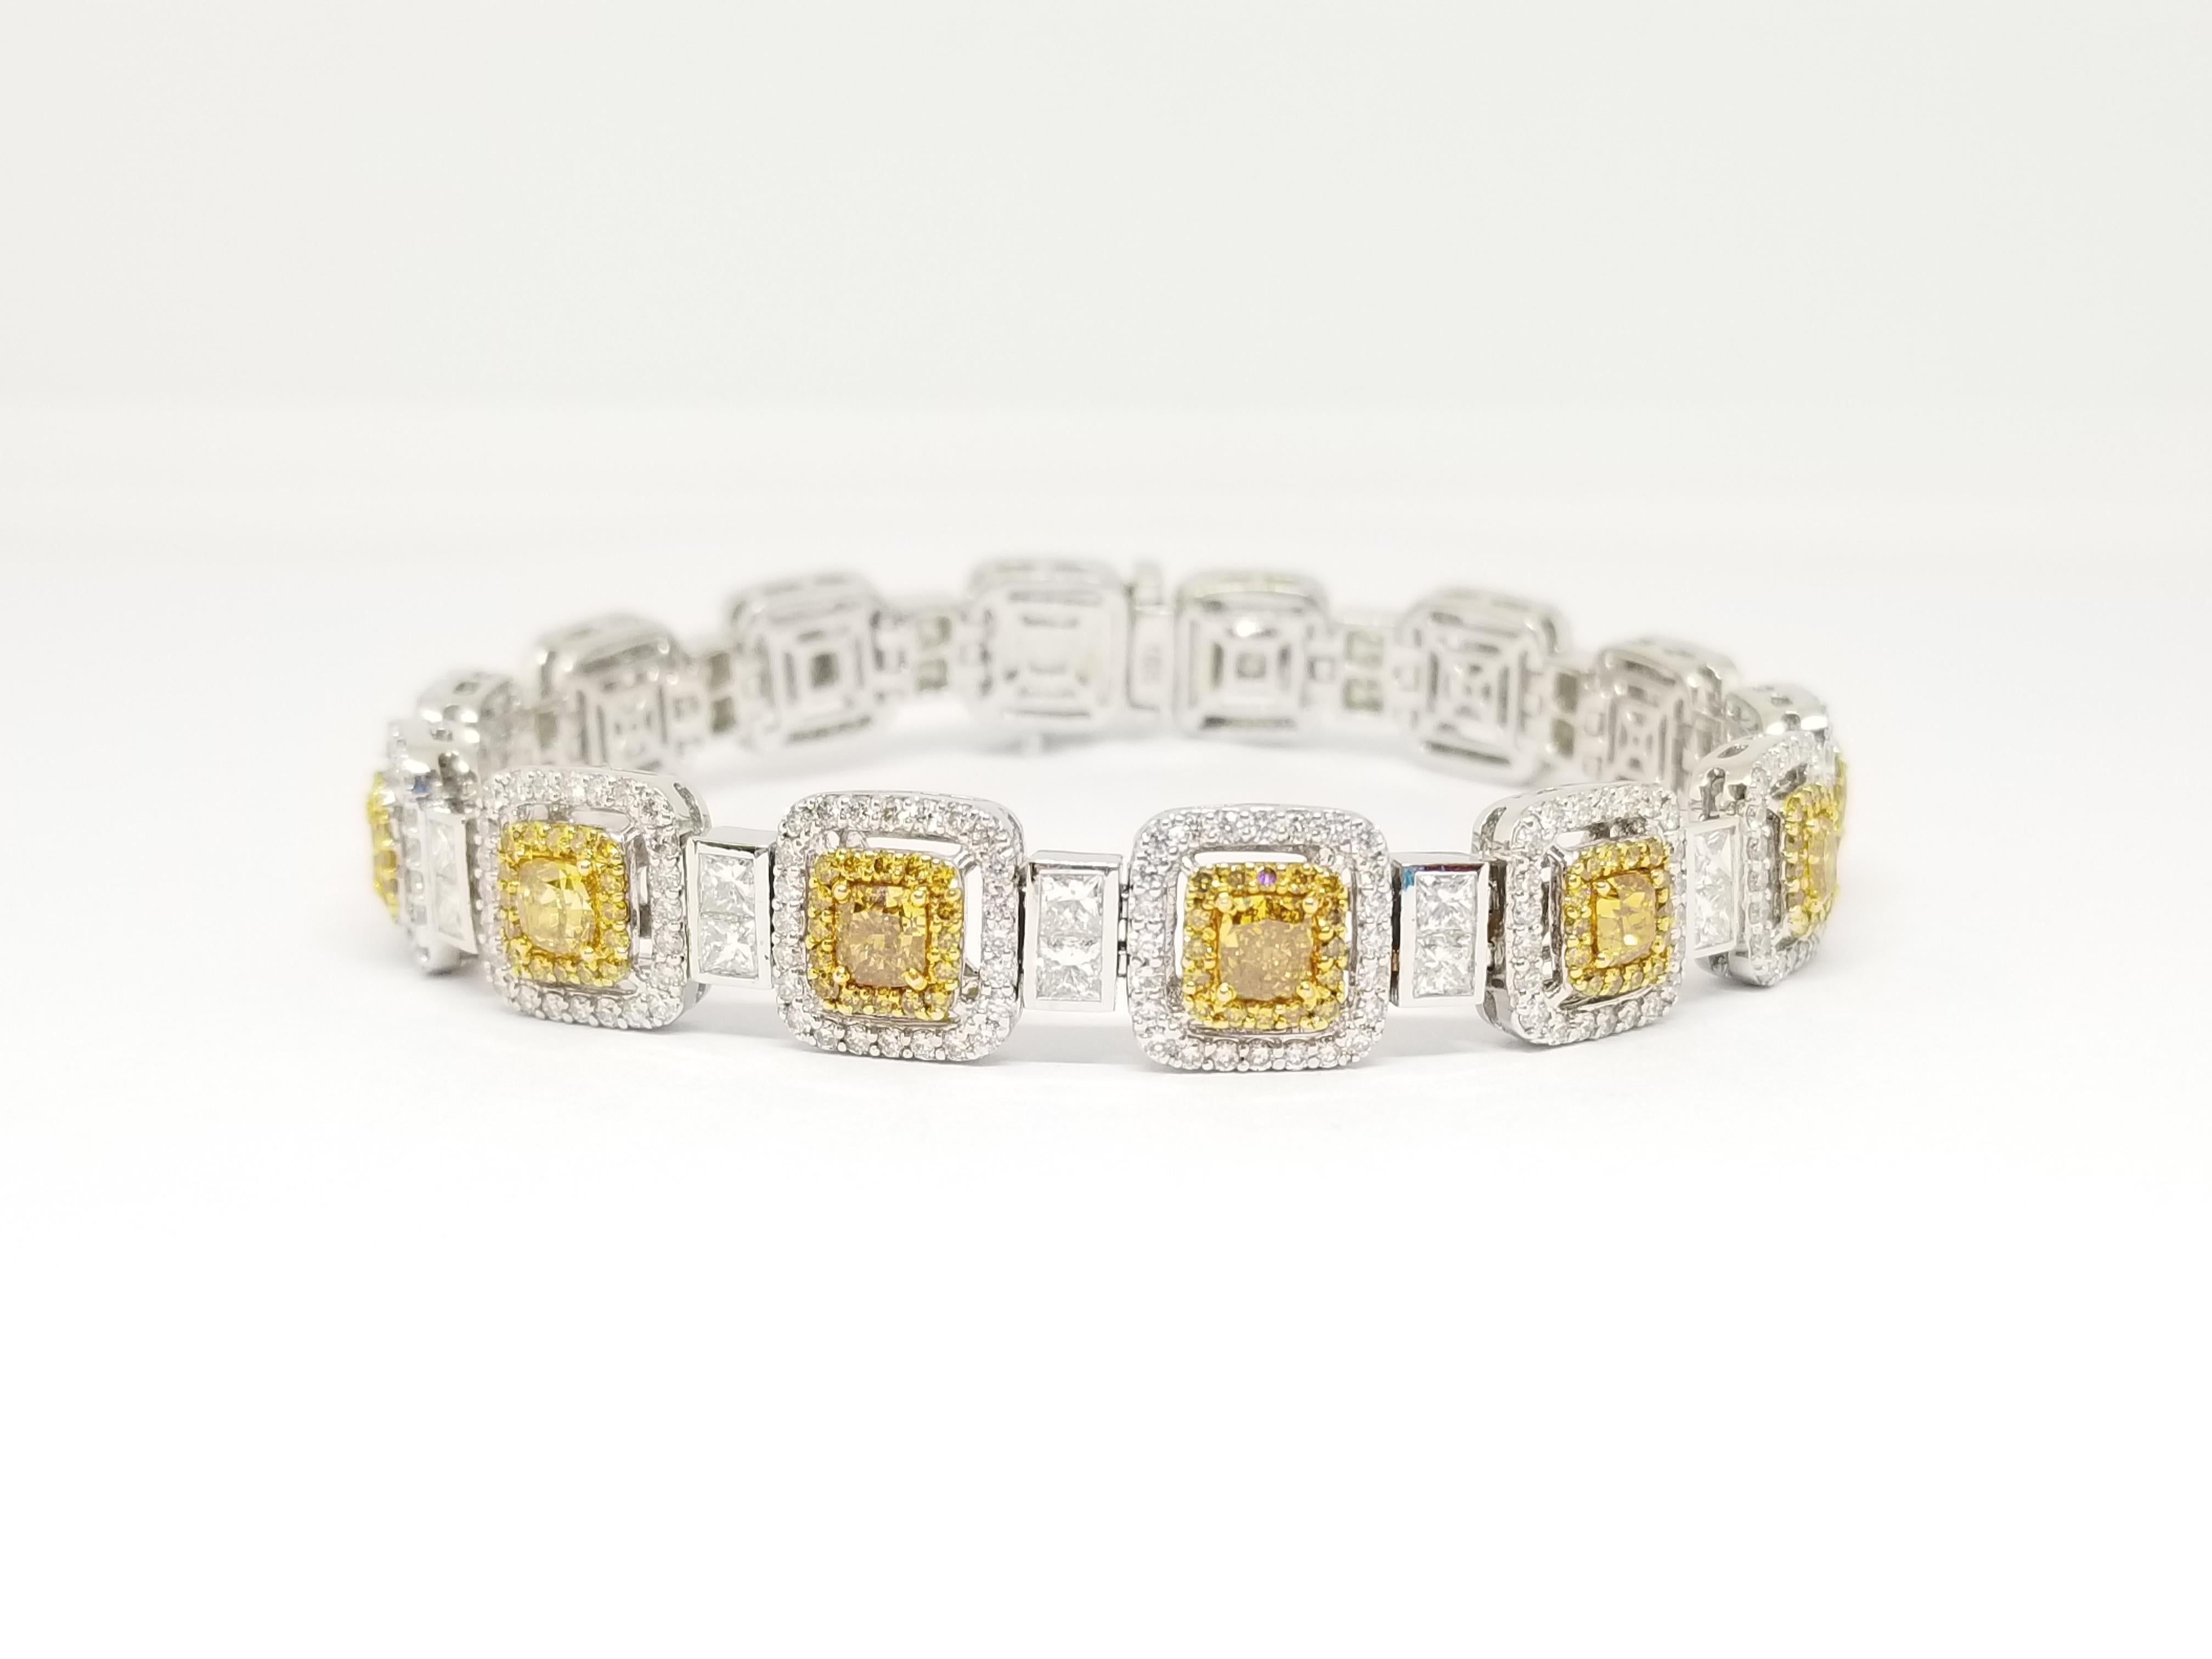 Stunning looking 14 pieces fancy shape colored diamonds bracelet. Perfectly matched fancy colored diamonds and multi-shaped white diamonds. Set in a gorgeous white gold and beautiful cut diamonds. Sparkle with intense fire and brilliance. 7 inch